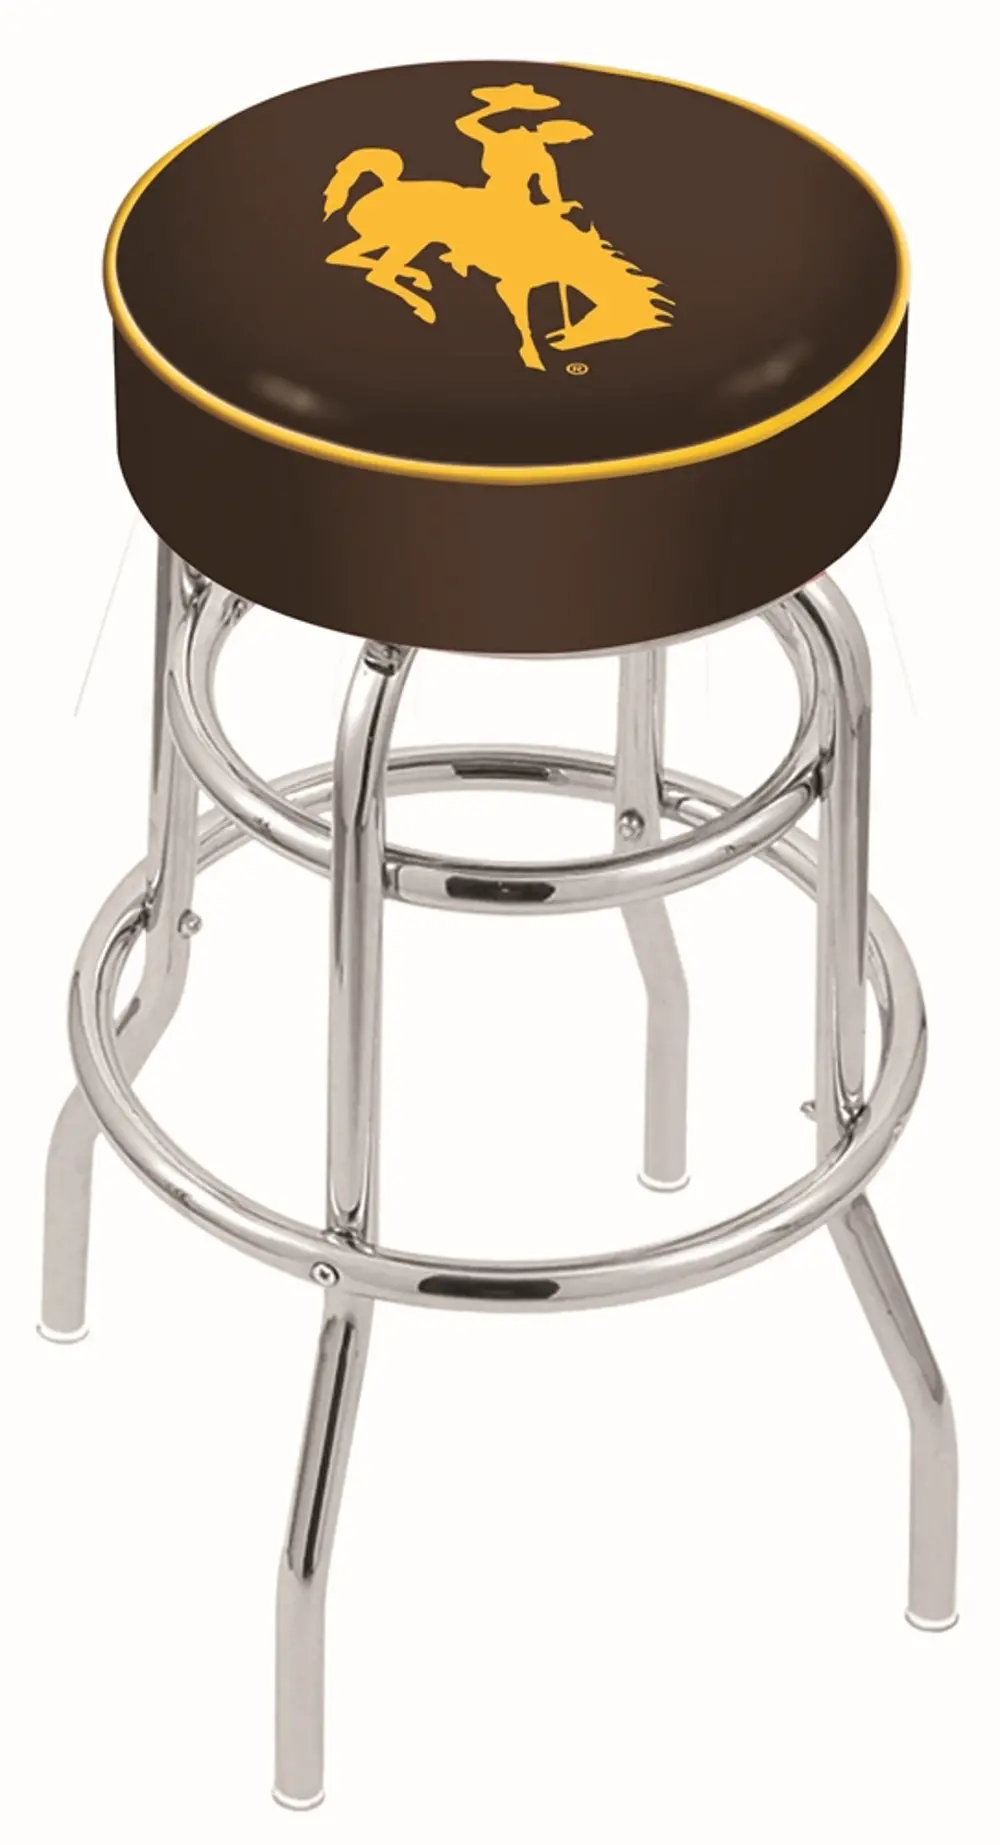 25 Inch Double Ring Swivel Counter Stool - University of Wyoming-1